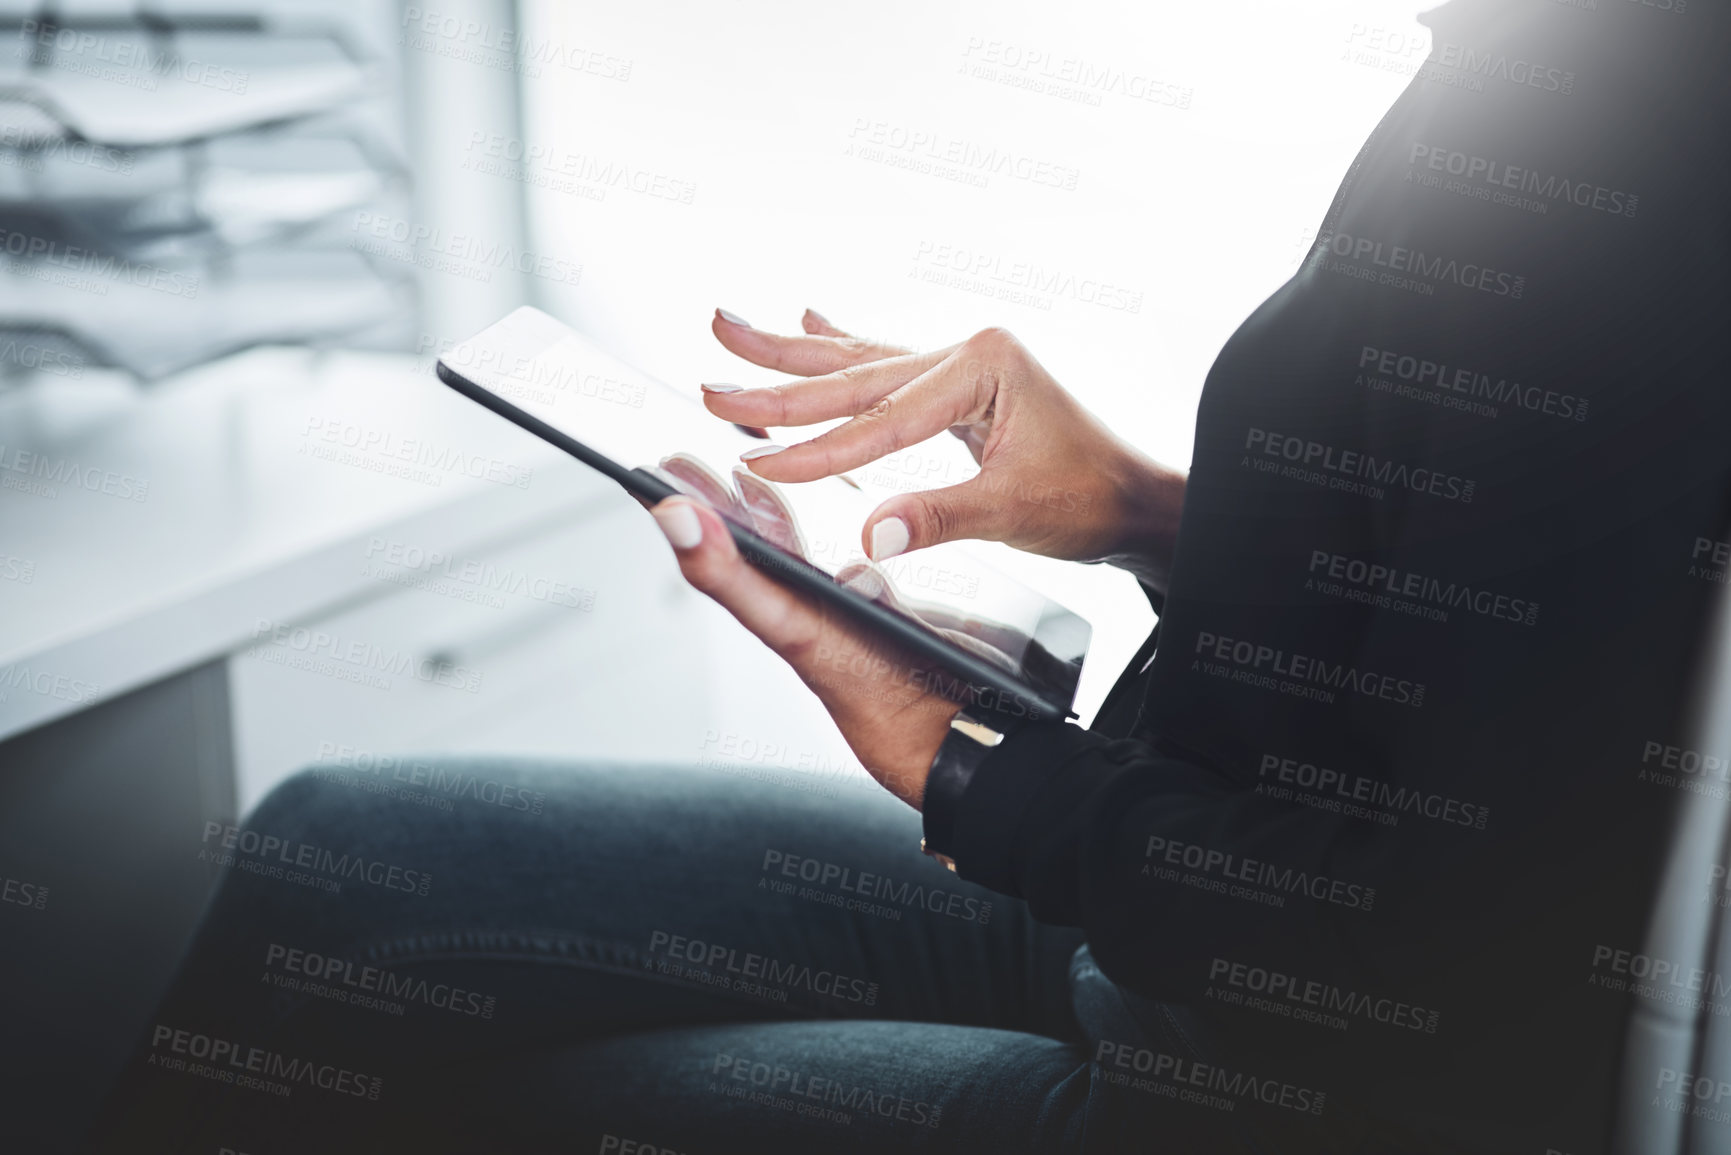 Buy stock photo Closeup shot of an unrecognisable businesswoman using a digital tablet in an office